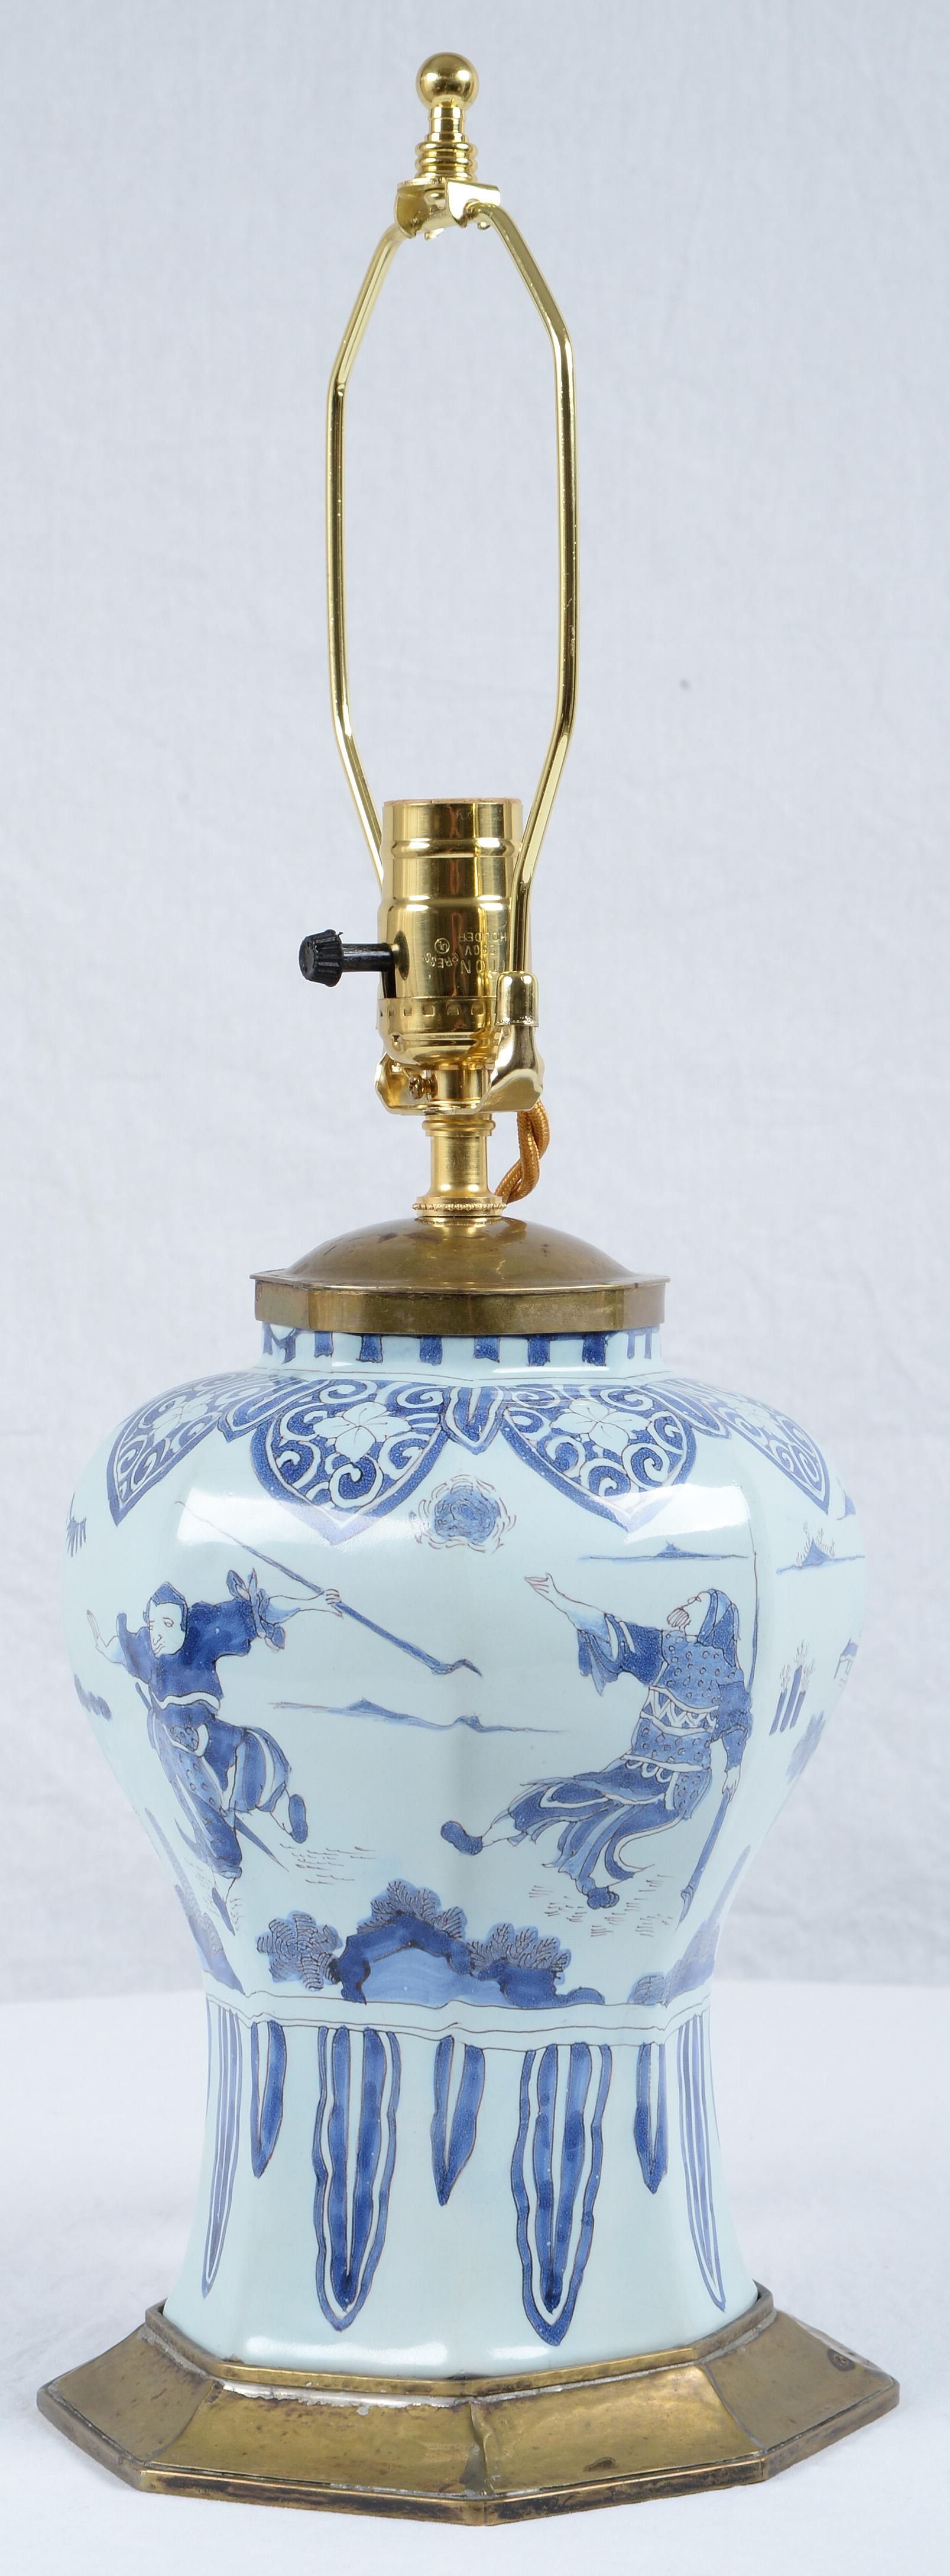 17th Century Dutch Delft Octagonal Faience Vase mounted in brass and decorated with a chinoiserie décor of fighting warriors and exotic landscape. The dimensions indicated herein are those of the vase with the fittings and lampshade. The mounted